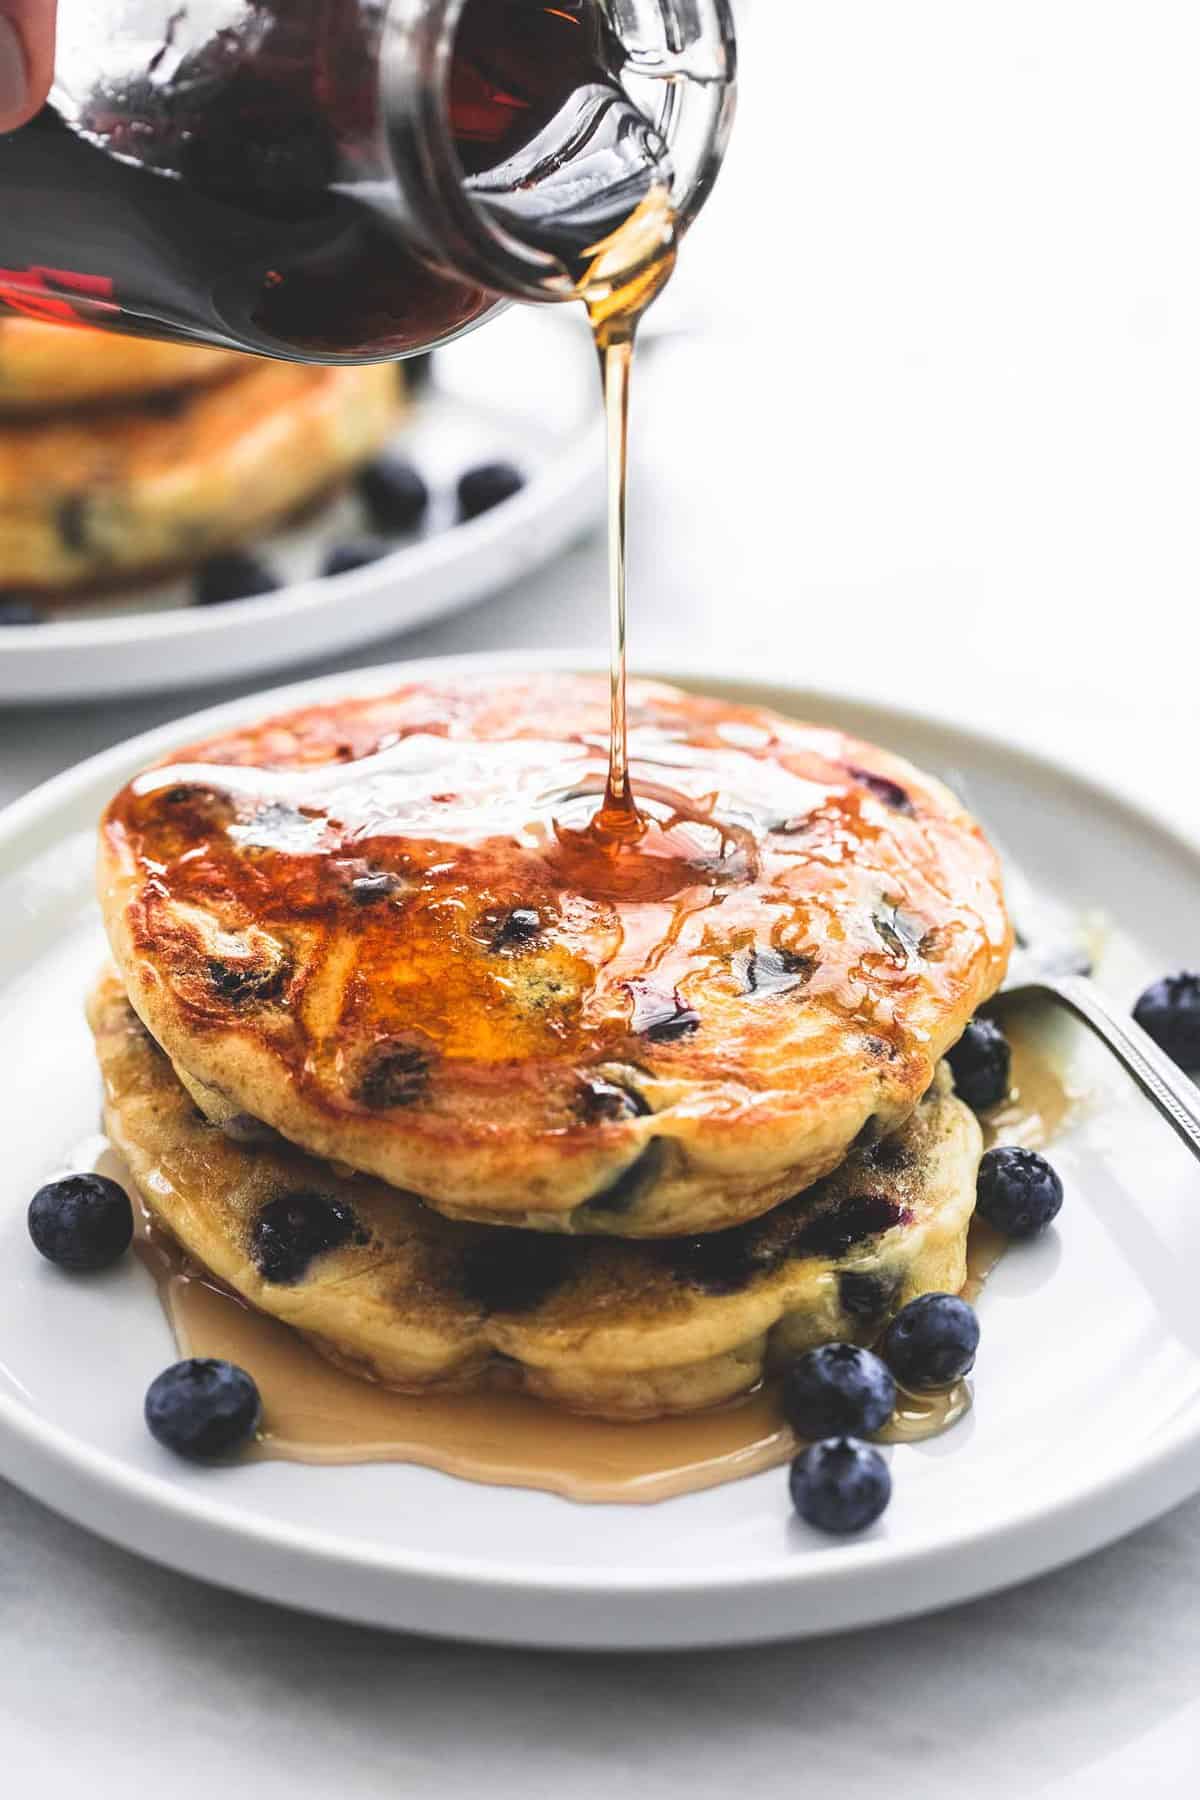 a jar of syrup being poured on top of a stack of blueberry pancakes with blueberries and a fork on the side all on a plate.